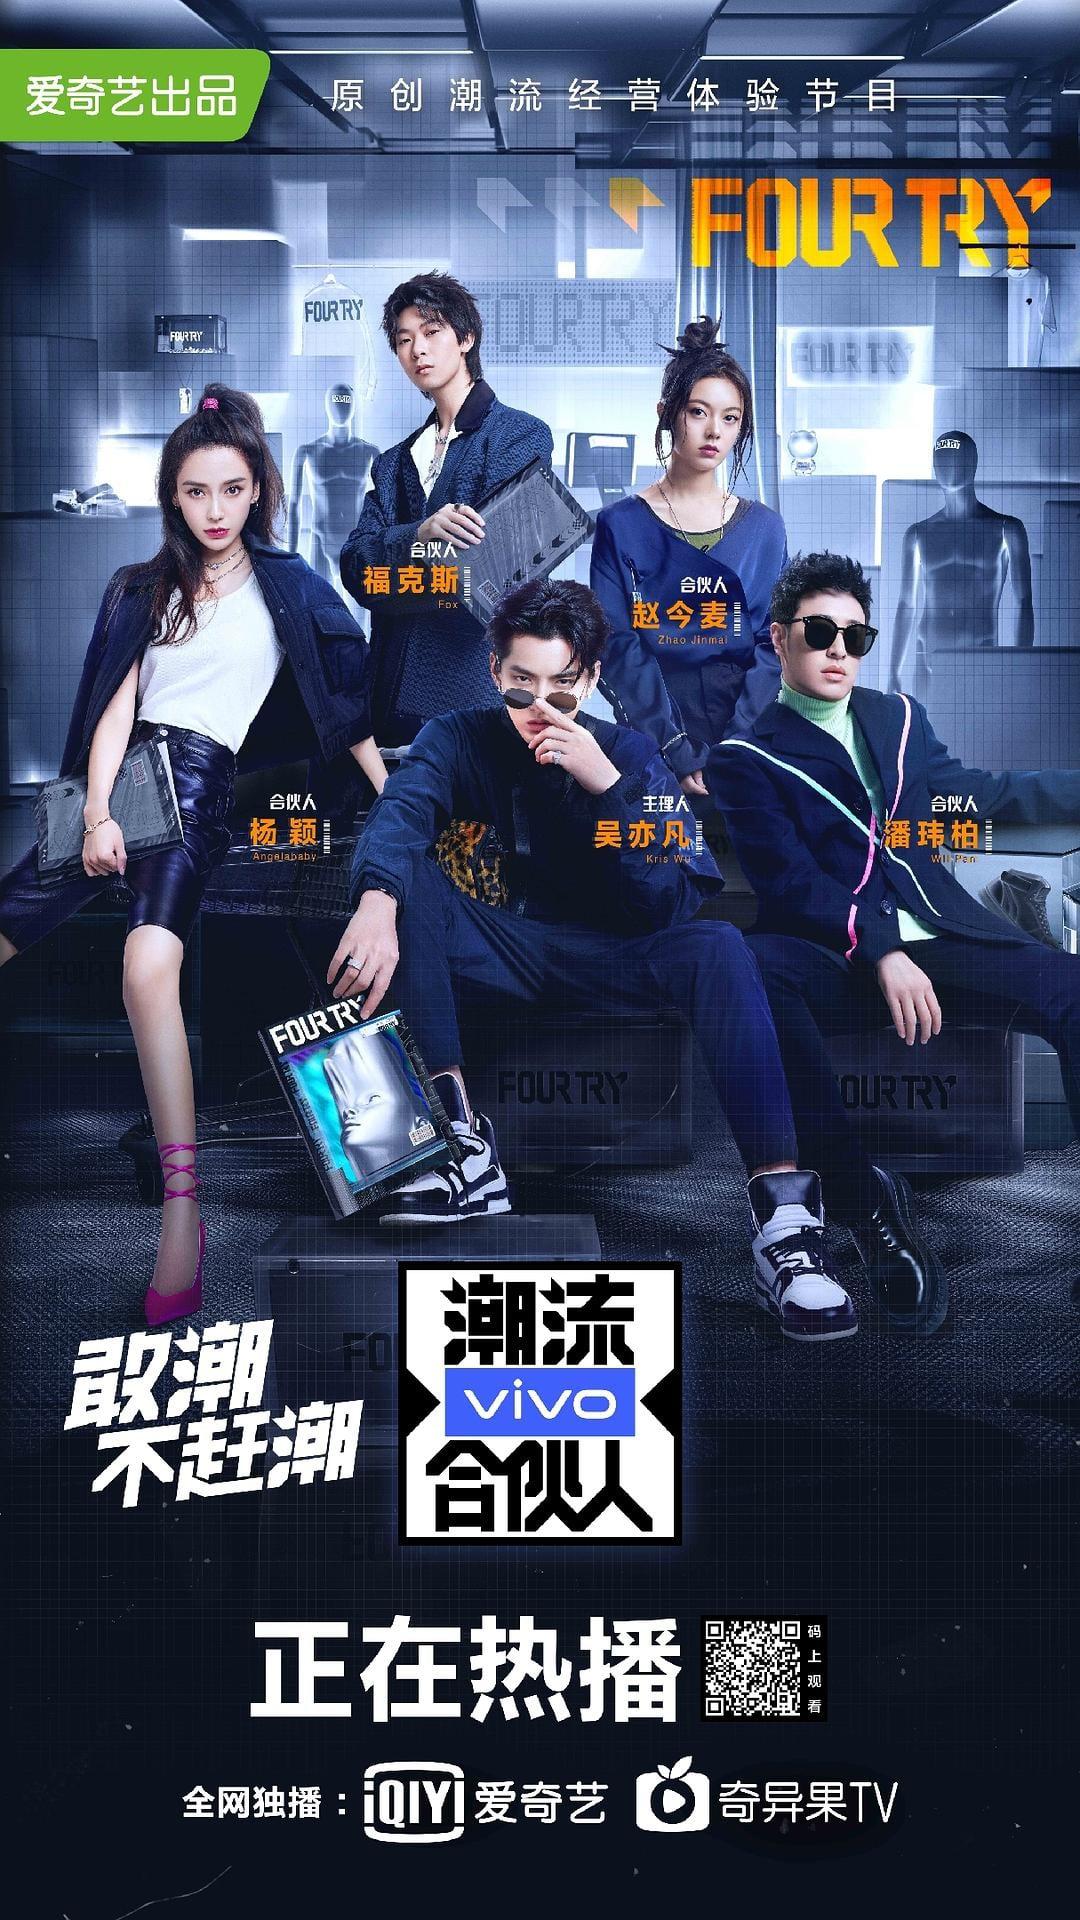 TV ratings for Four Try(潮流合伙人) in Sweden. iqiyi TV series